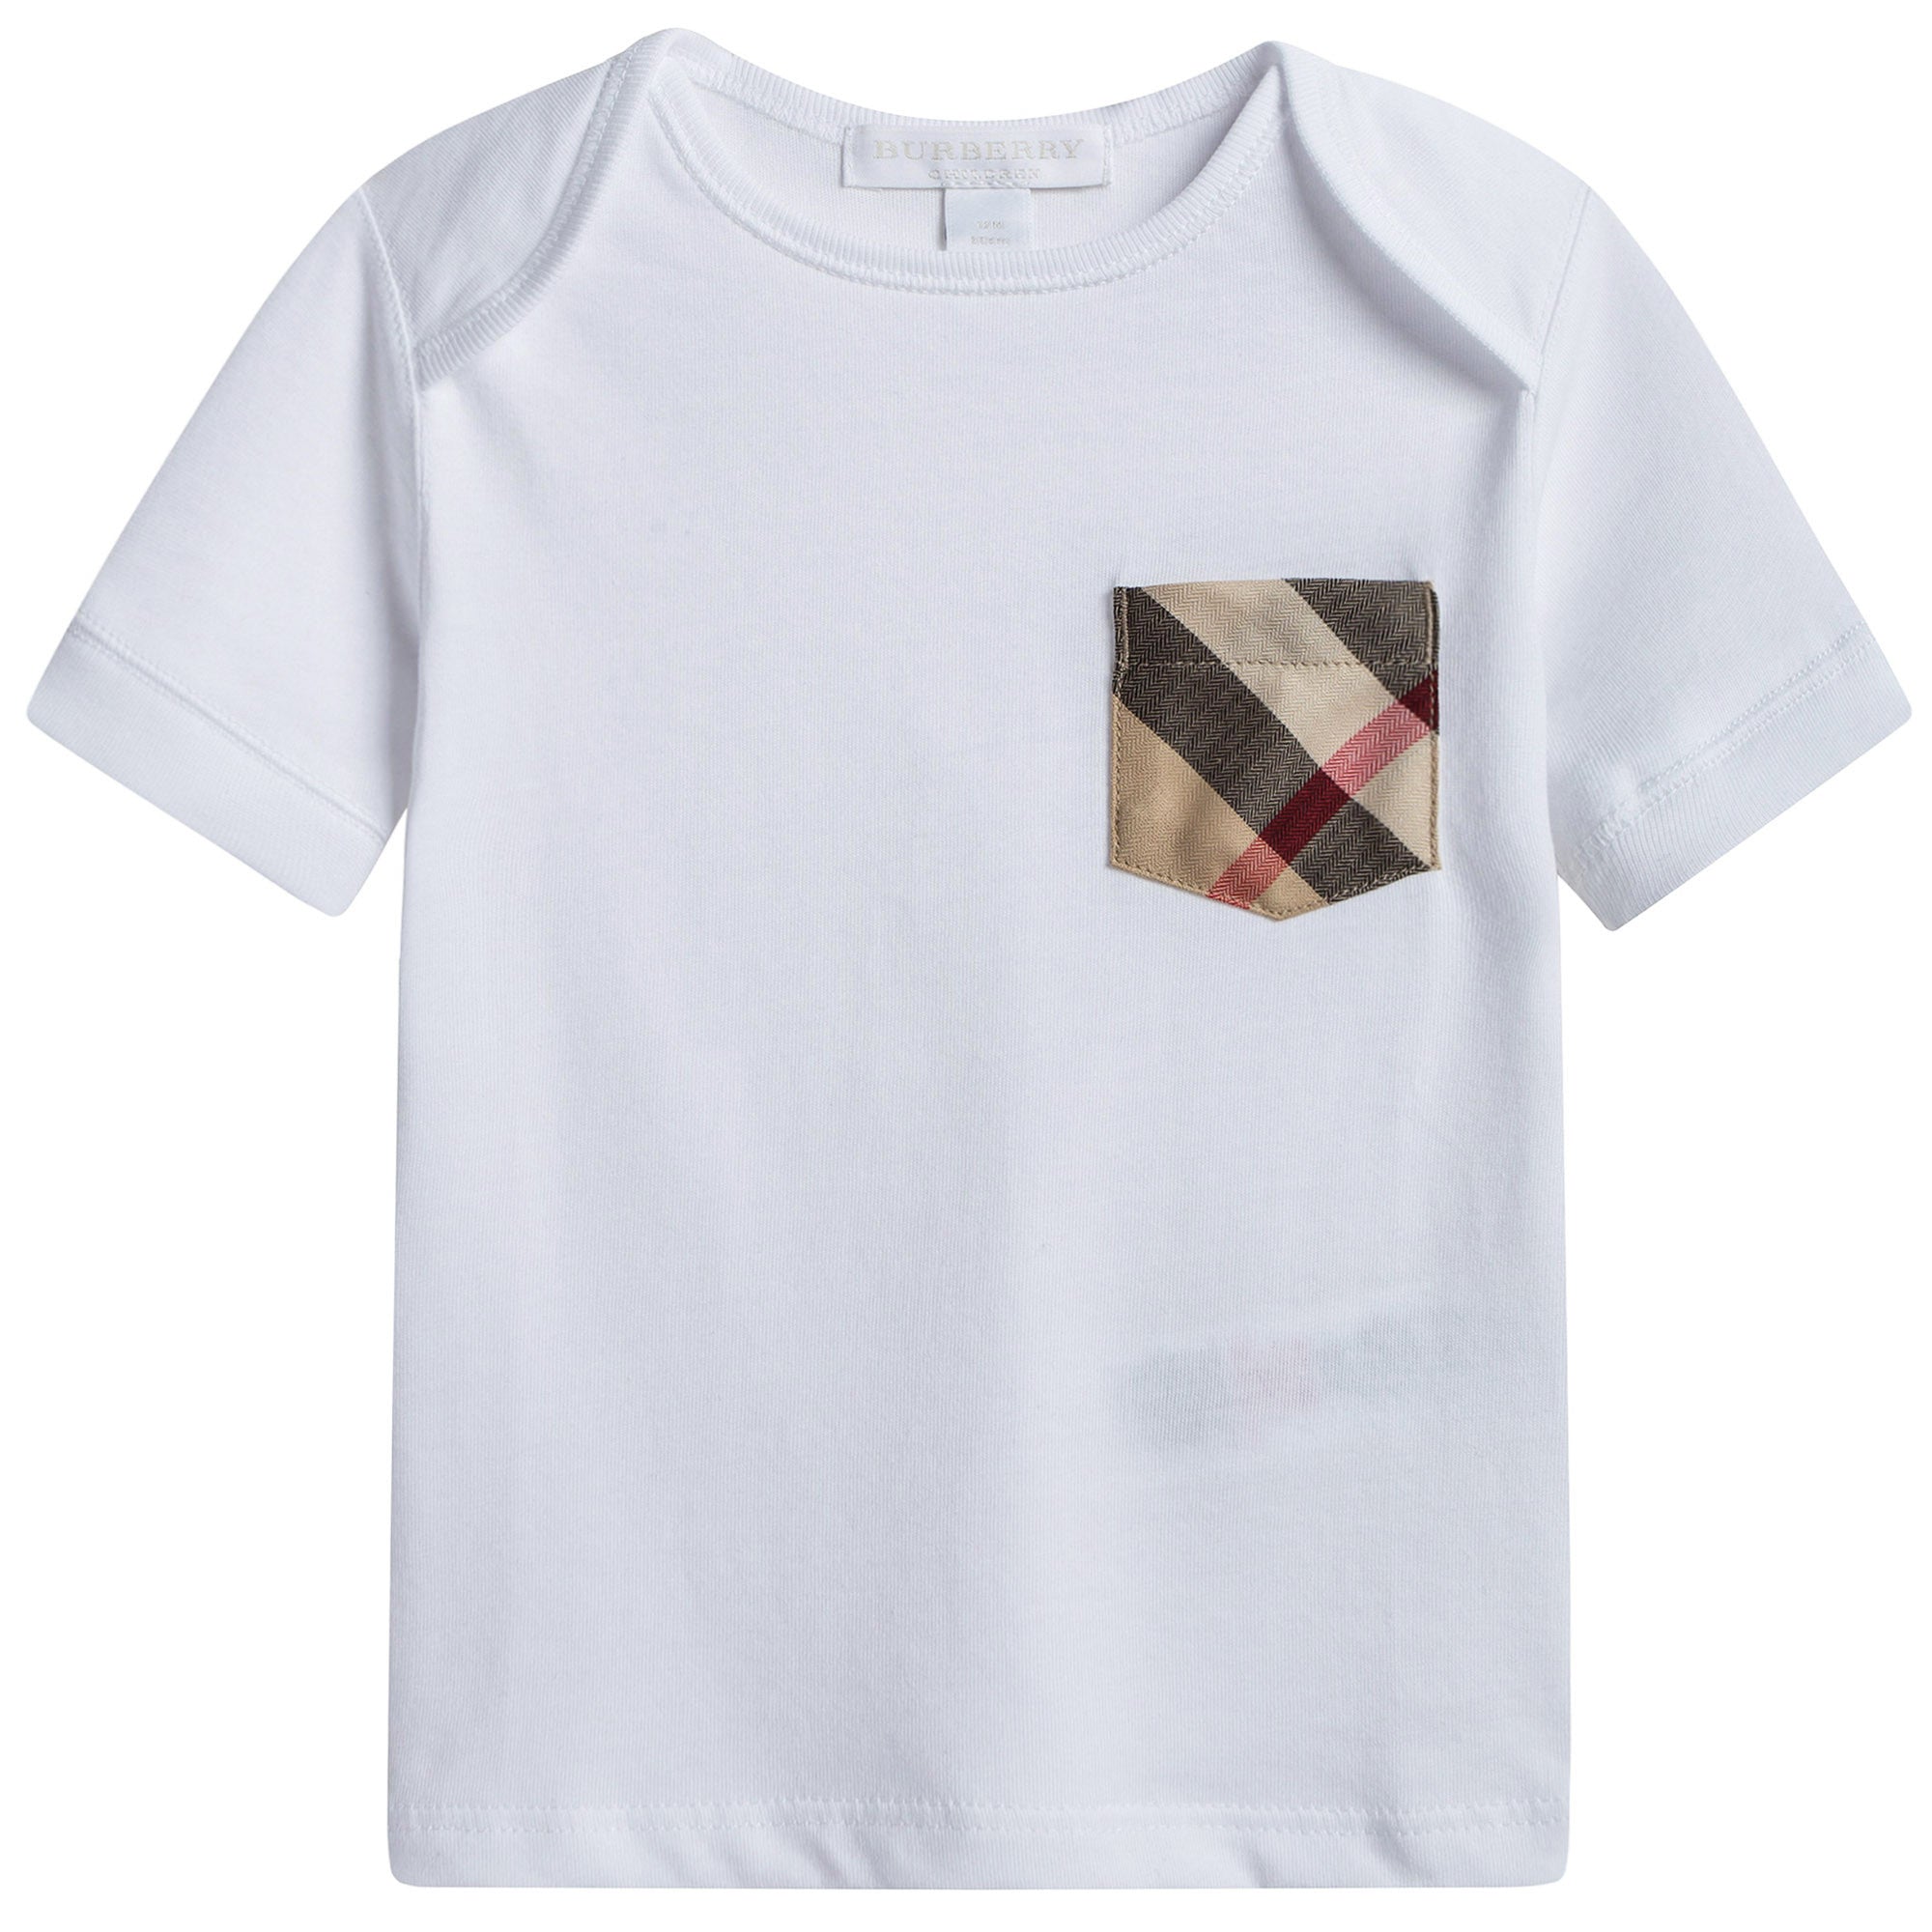 Baby Girls White Cotton Long Sleeves T-shirt With Check Pocket